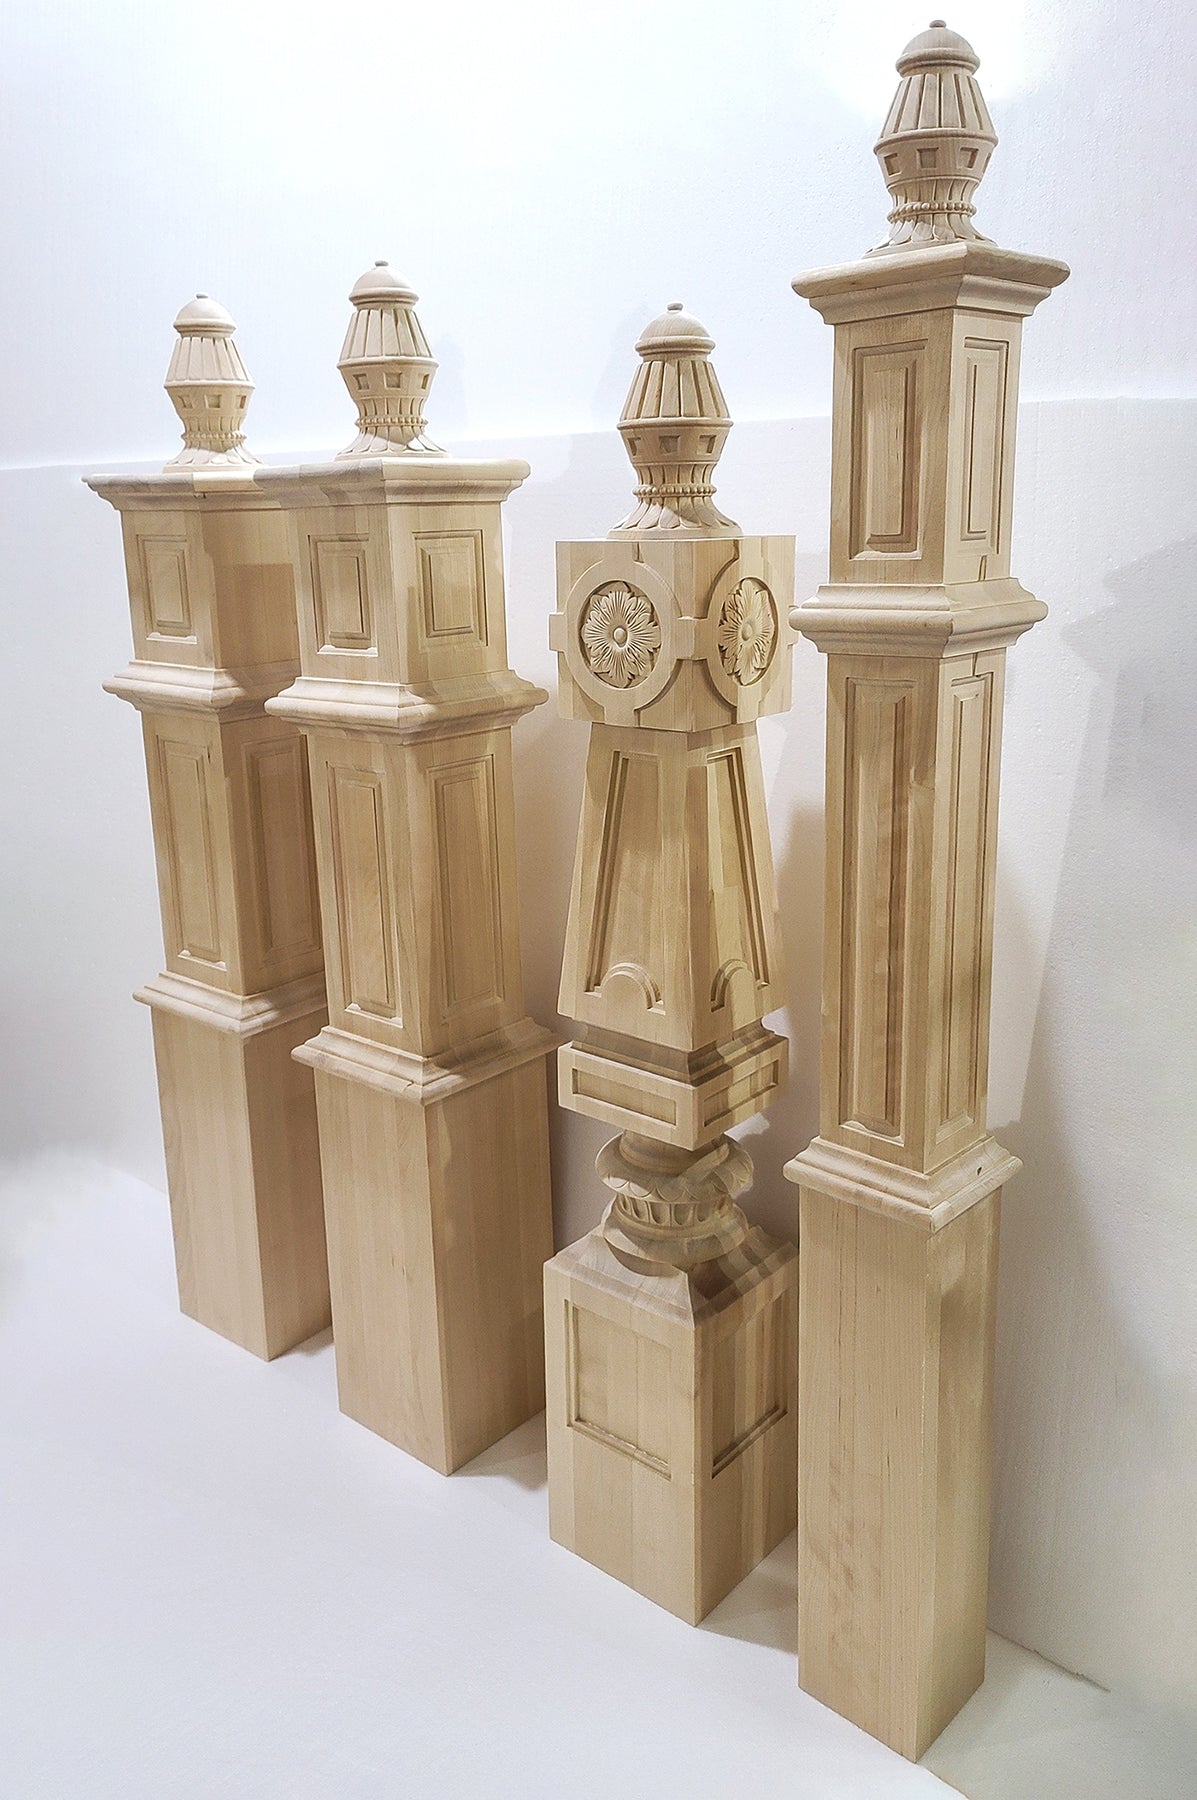 CUSTOM220828-Part 1,  Four Designs of Newel Posts, SOLD